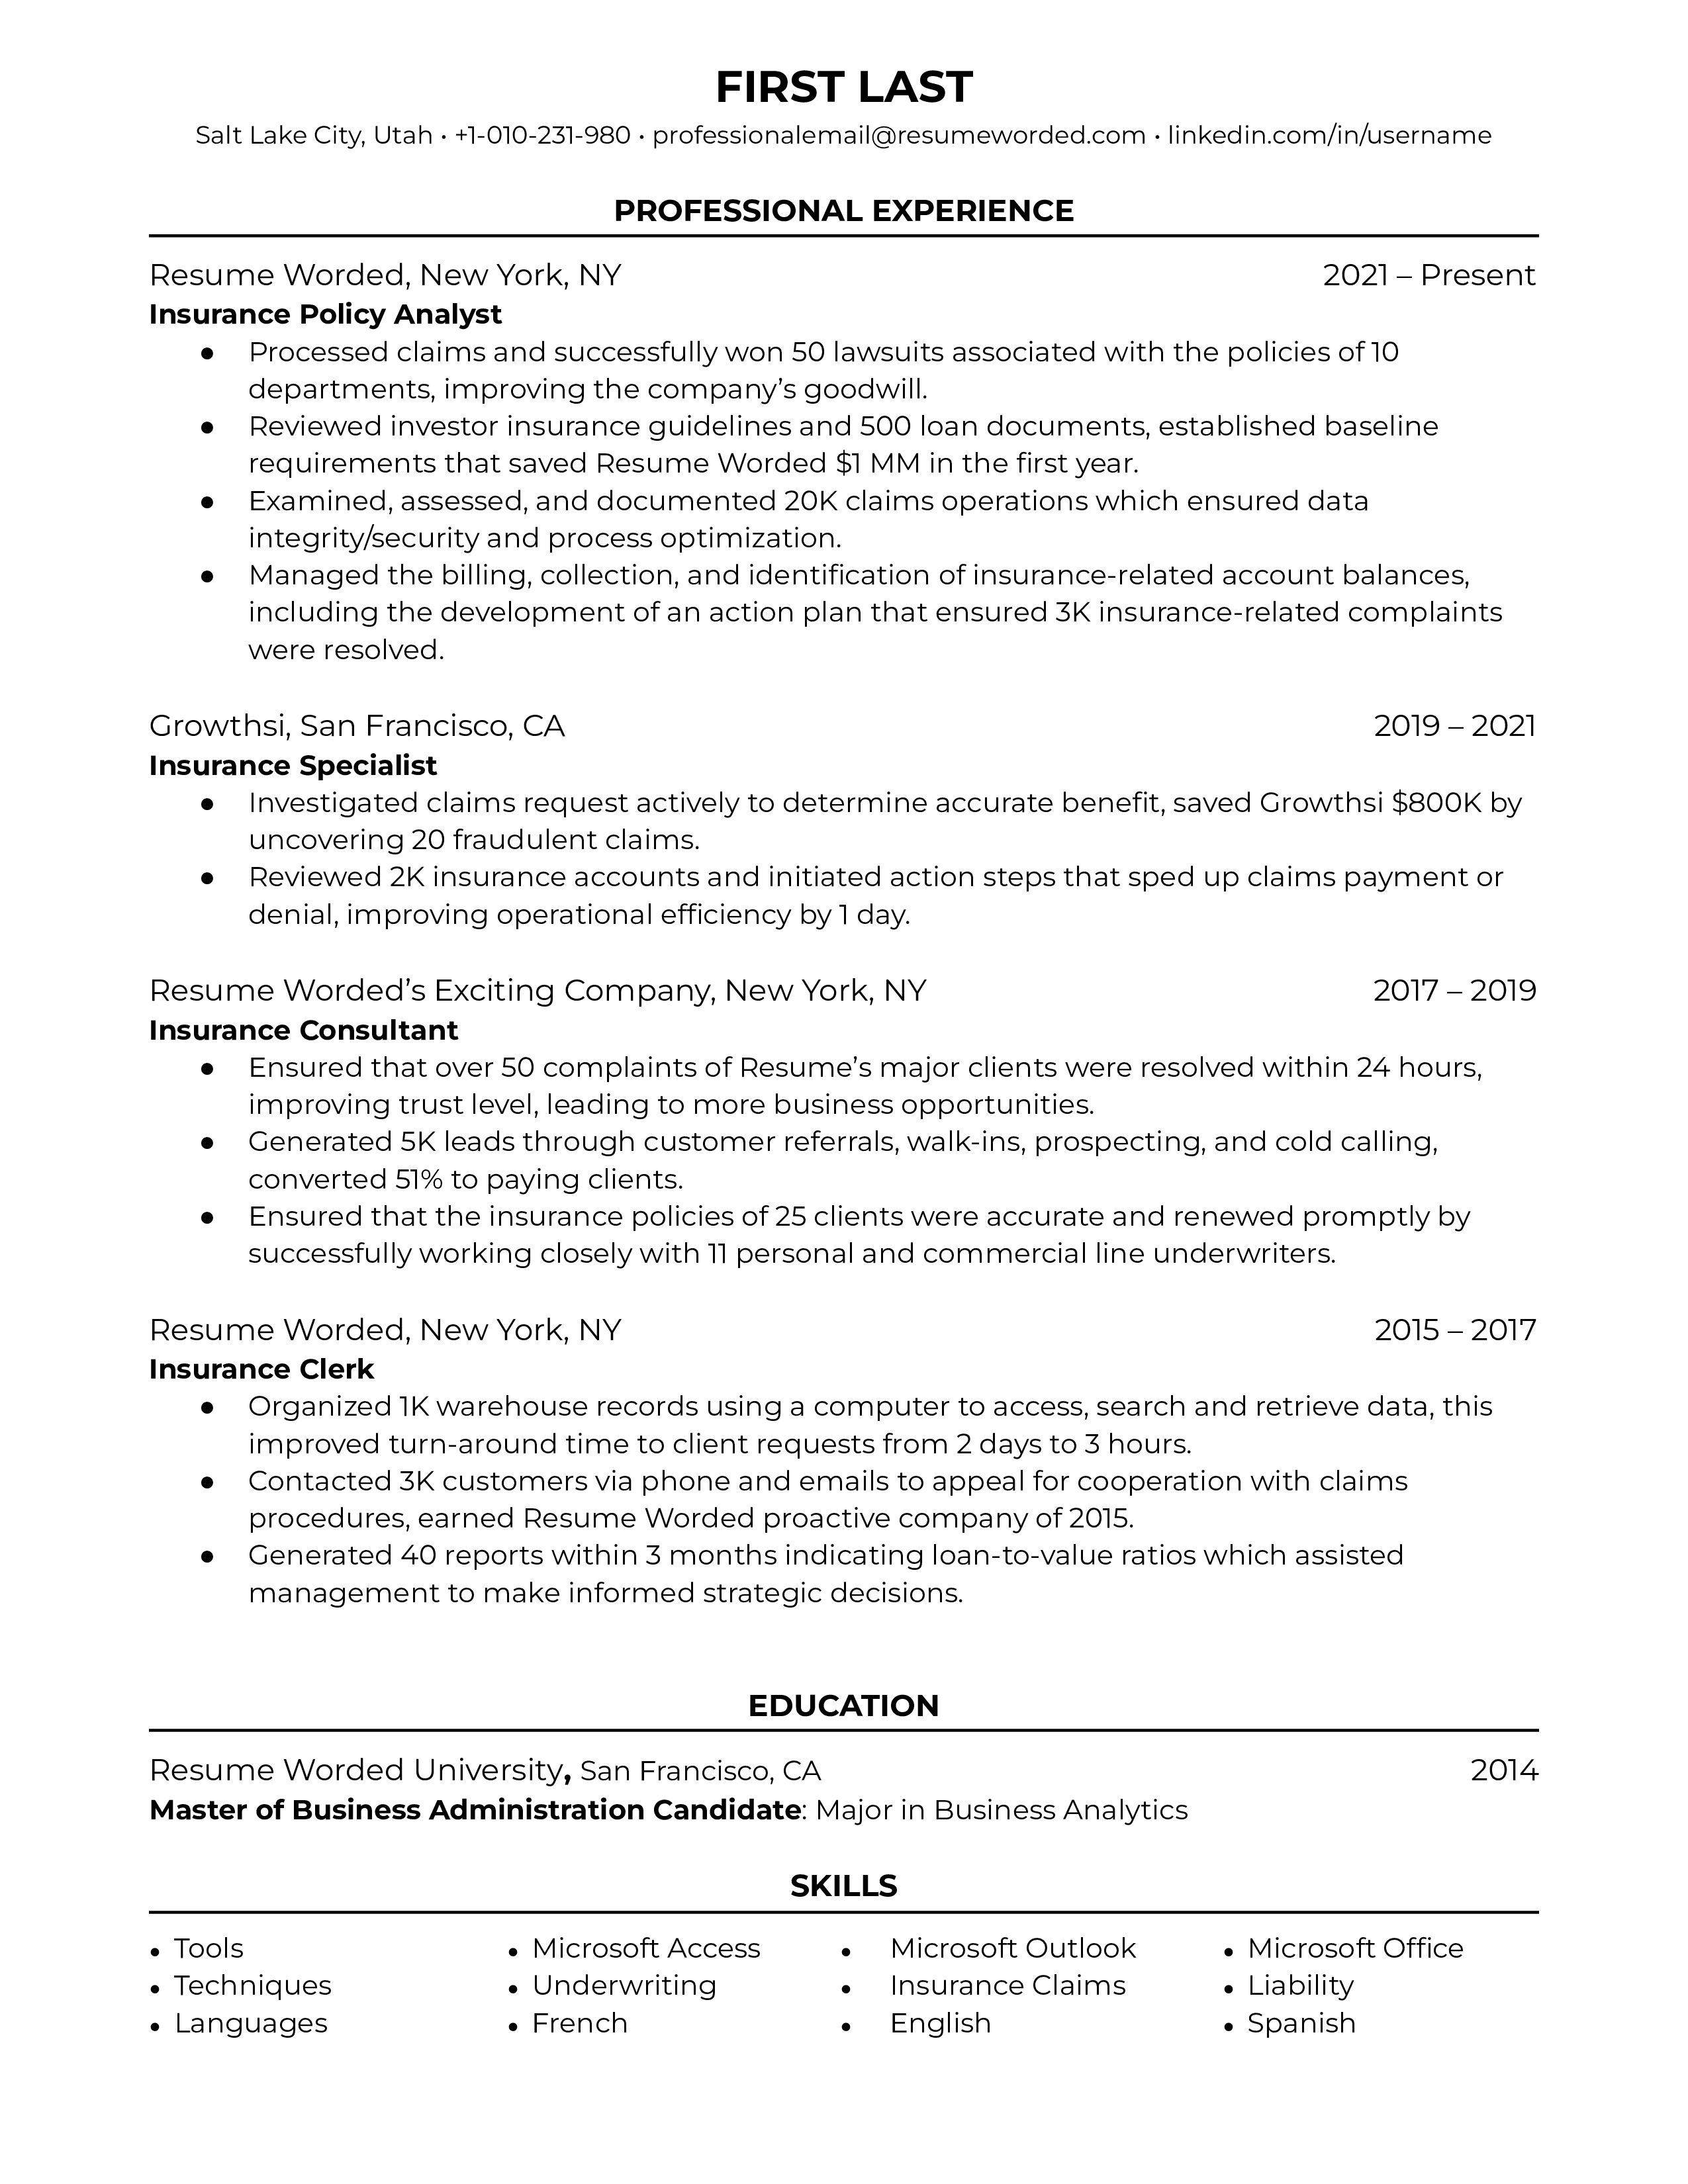 Insurance Policy Analyst resume sample that highlights the applicant's quantitaitive value addition and their specialized experience